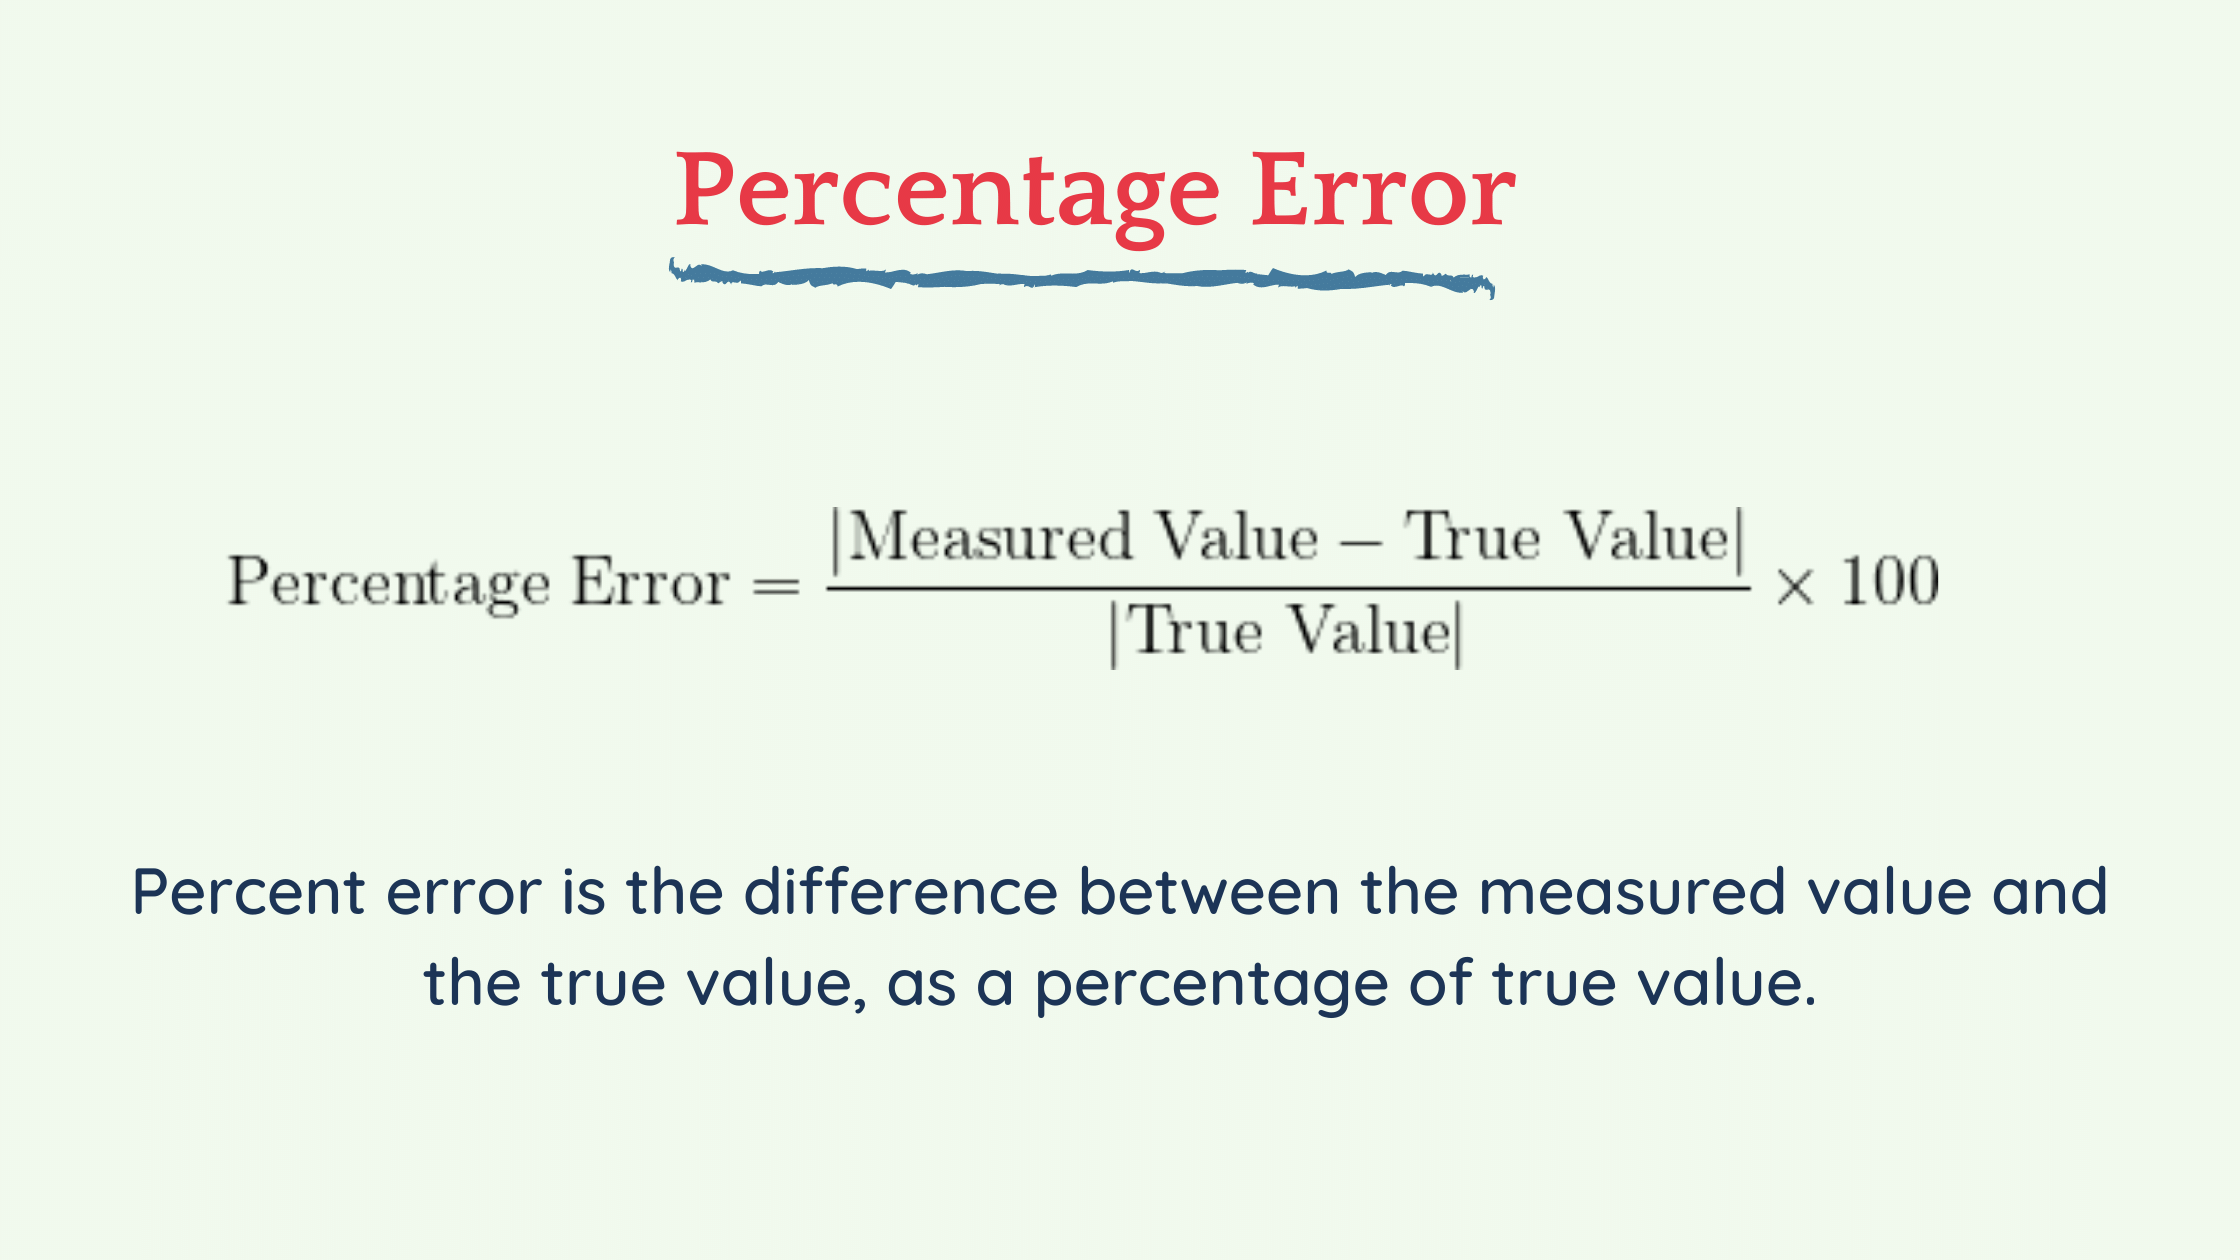 How to calculate percentage error